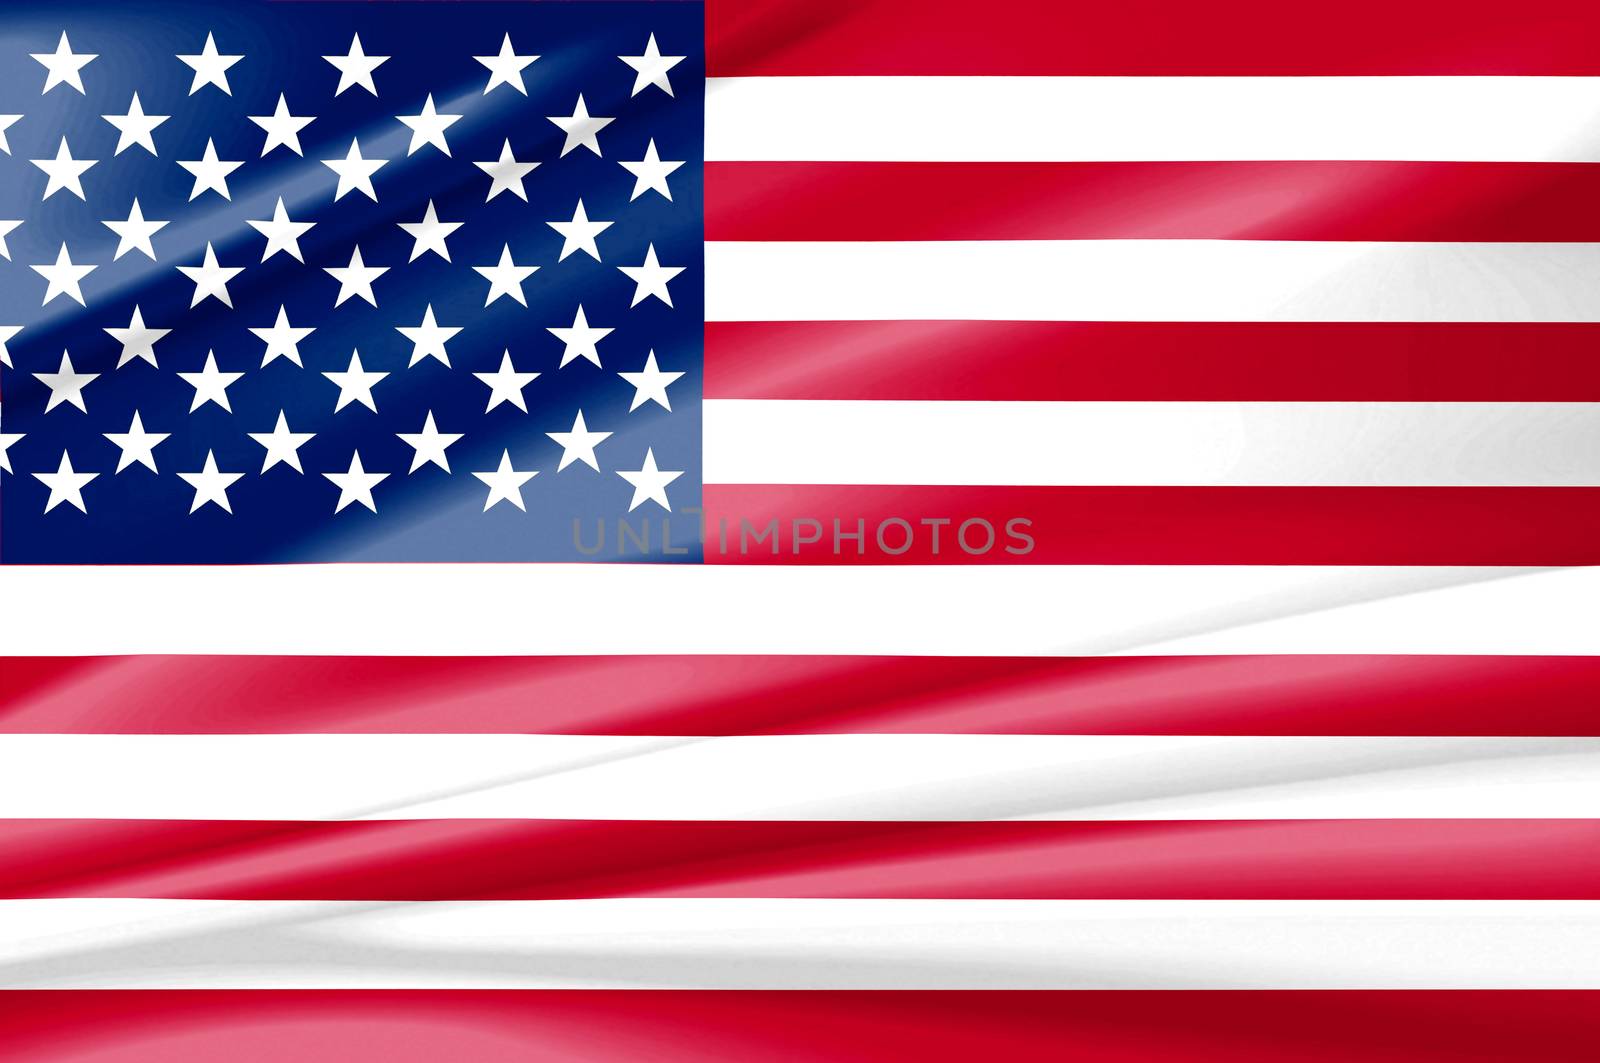 United States of america red white and blue country flag. Beauti by C_Aphirak